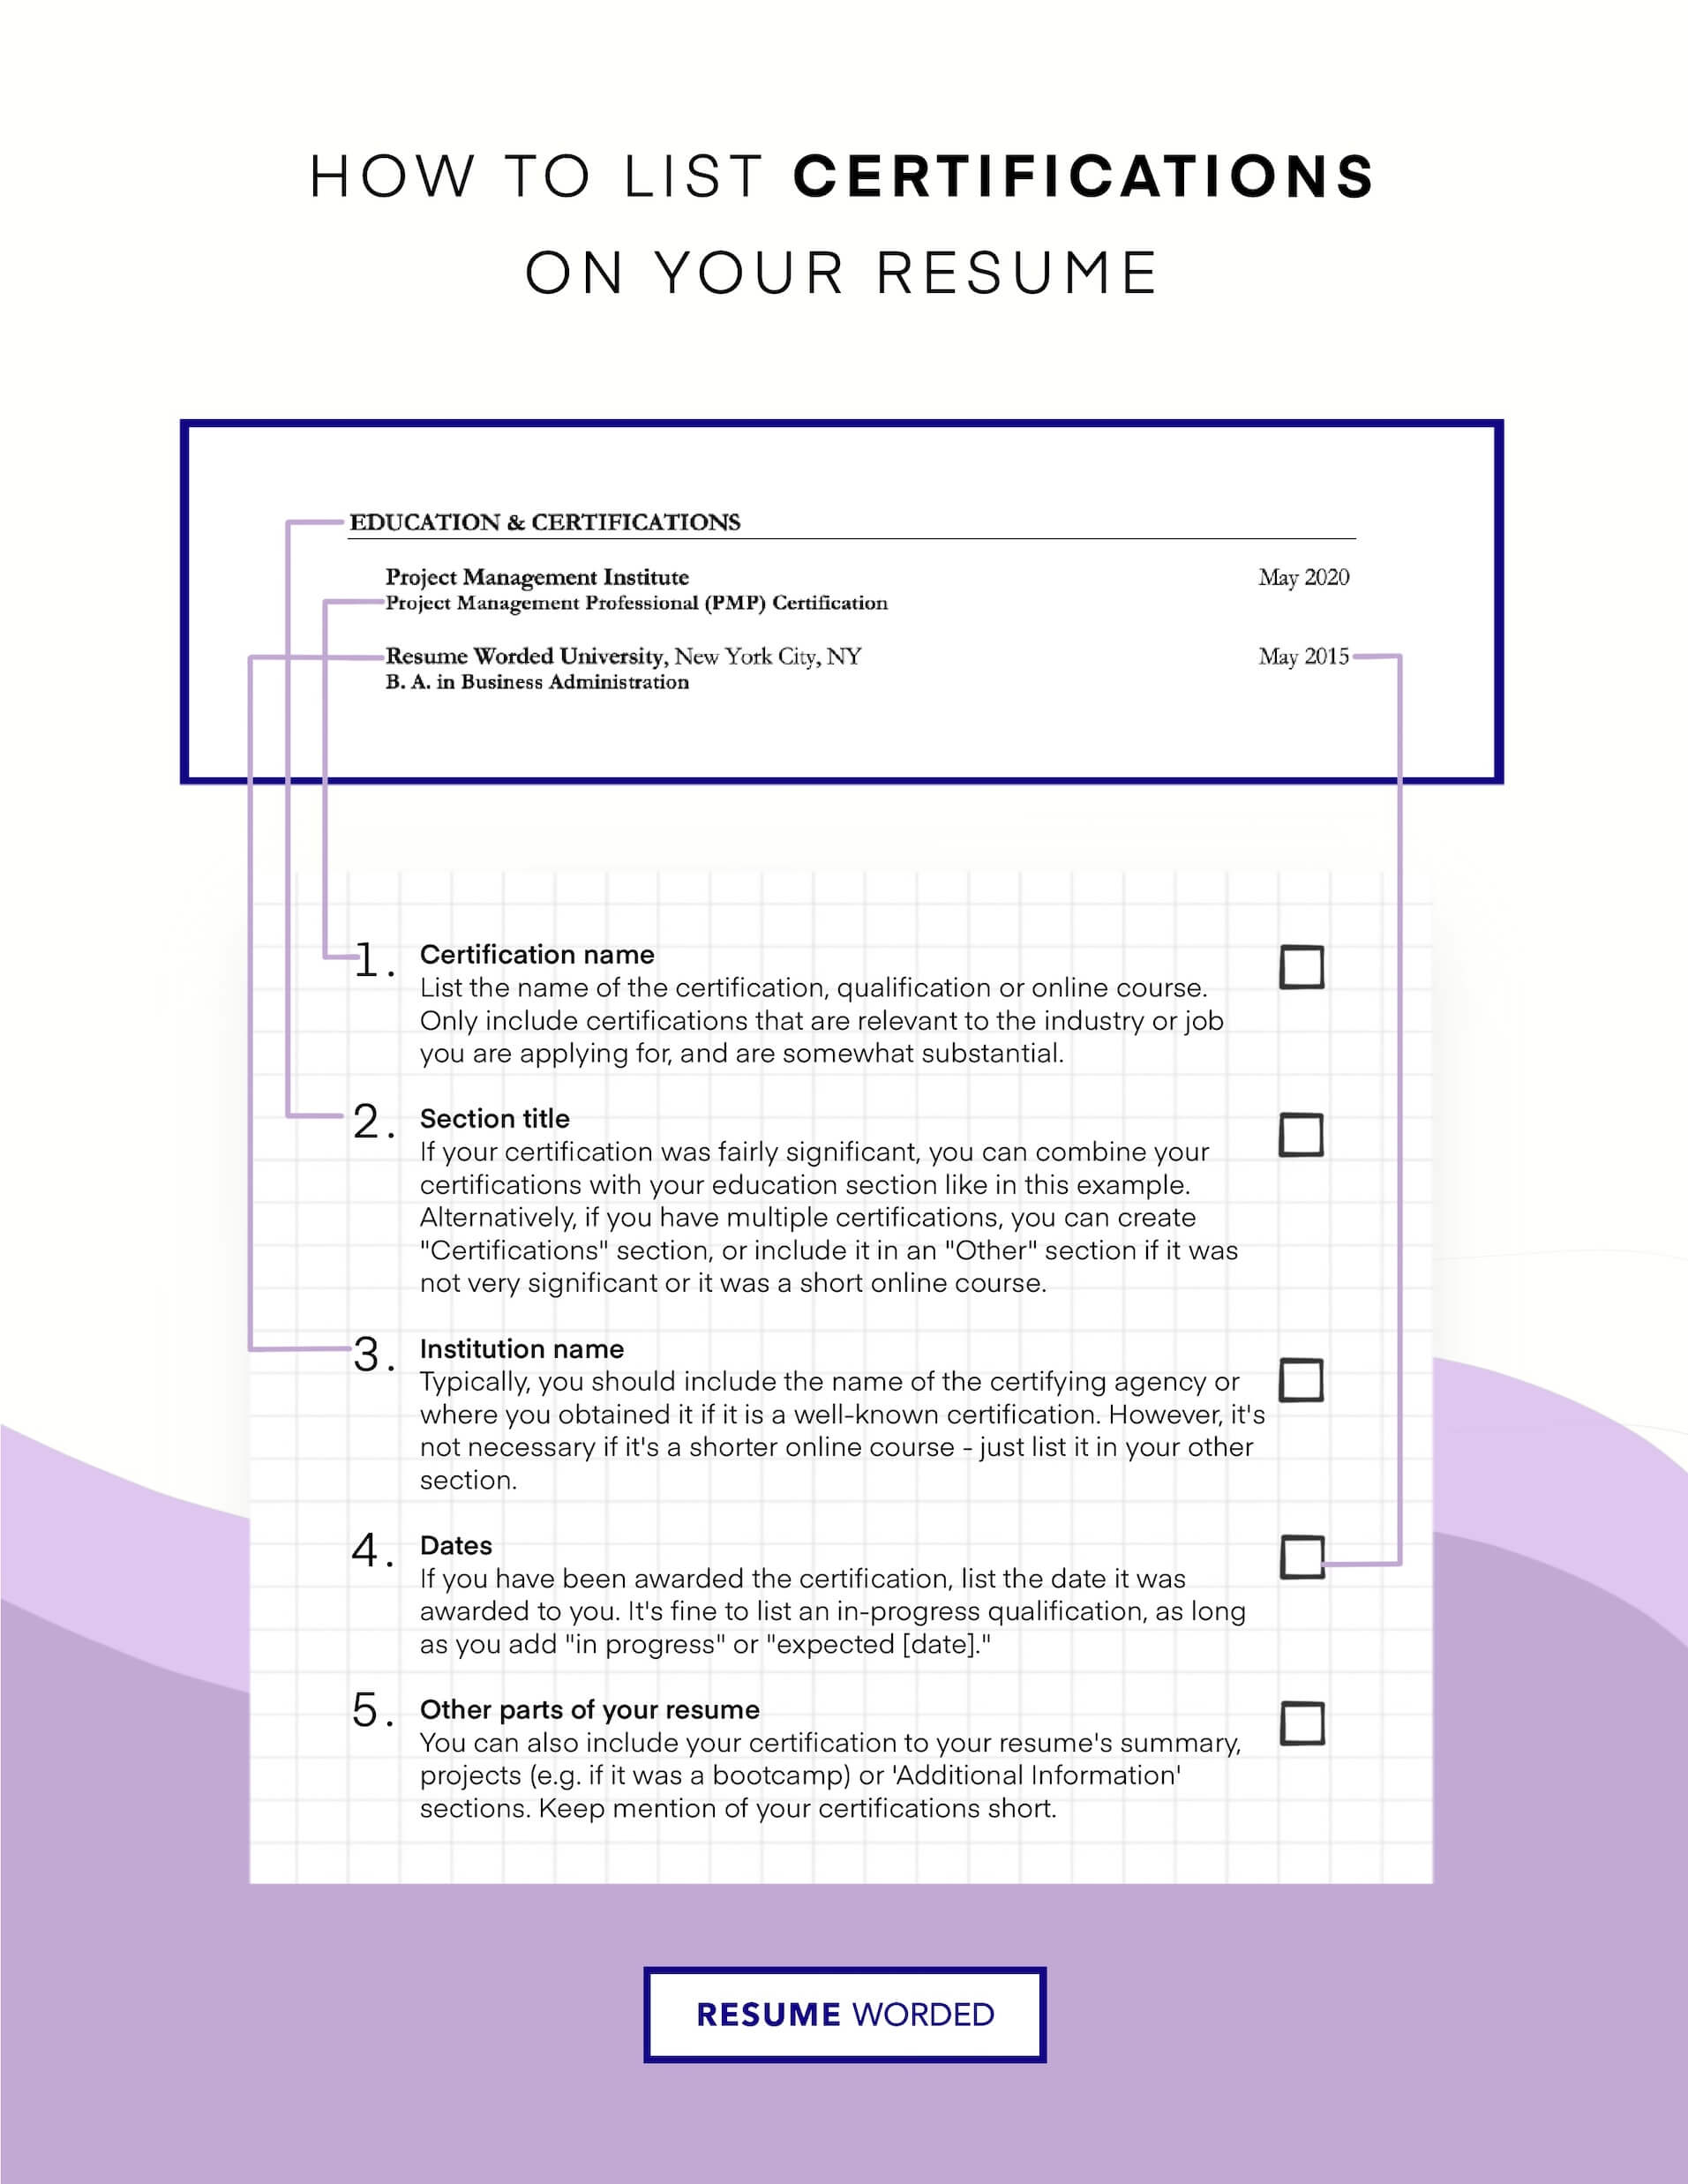 Showcase your knowledge with certificates - Entry Level Medical Coder  Resume